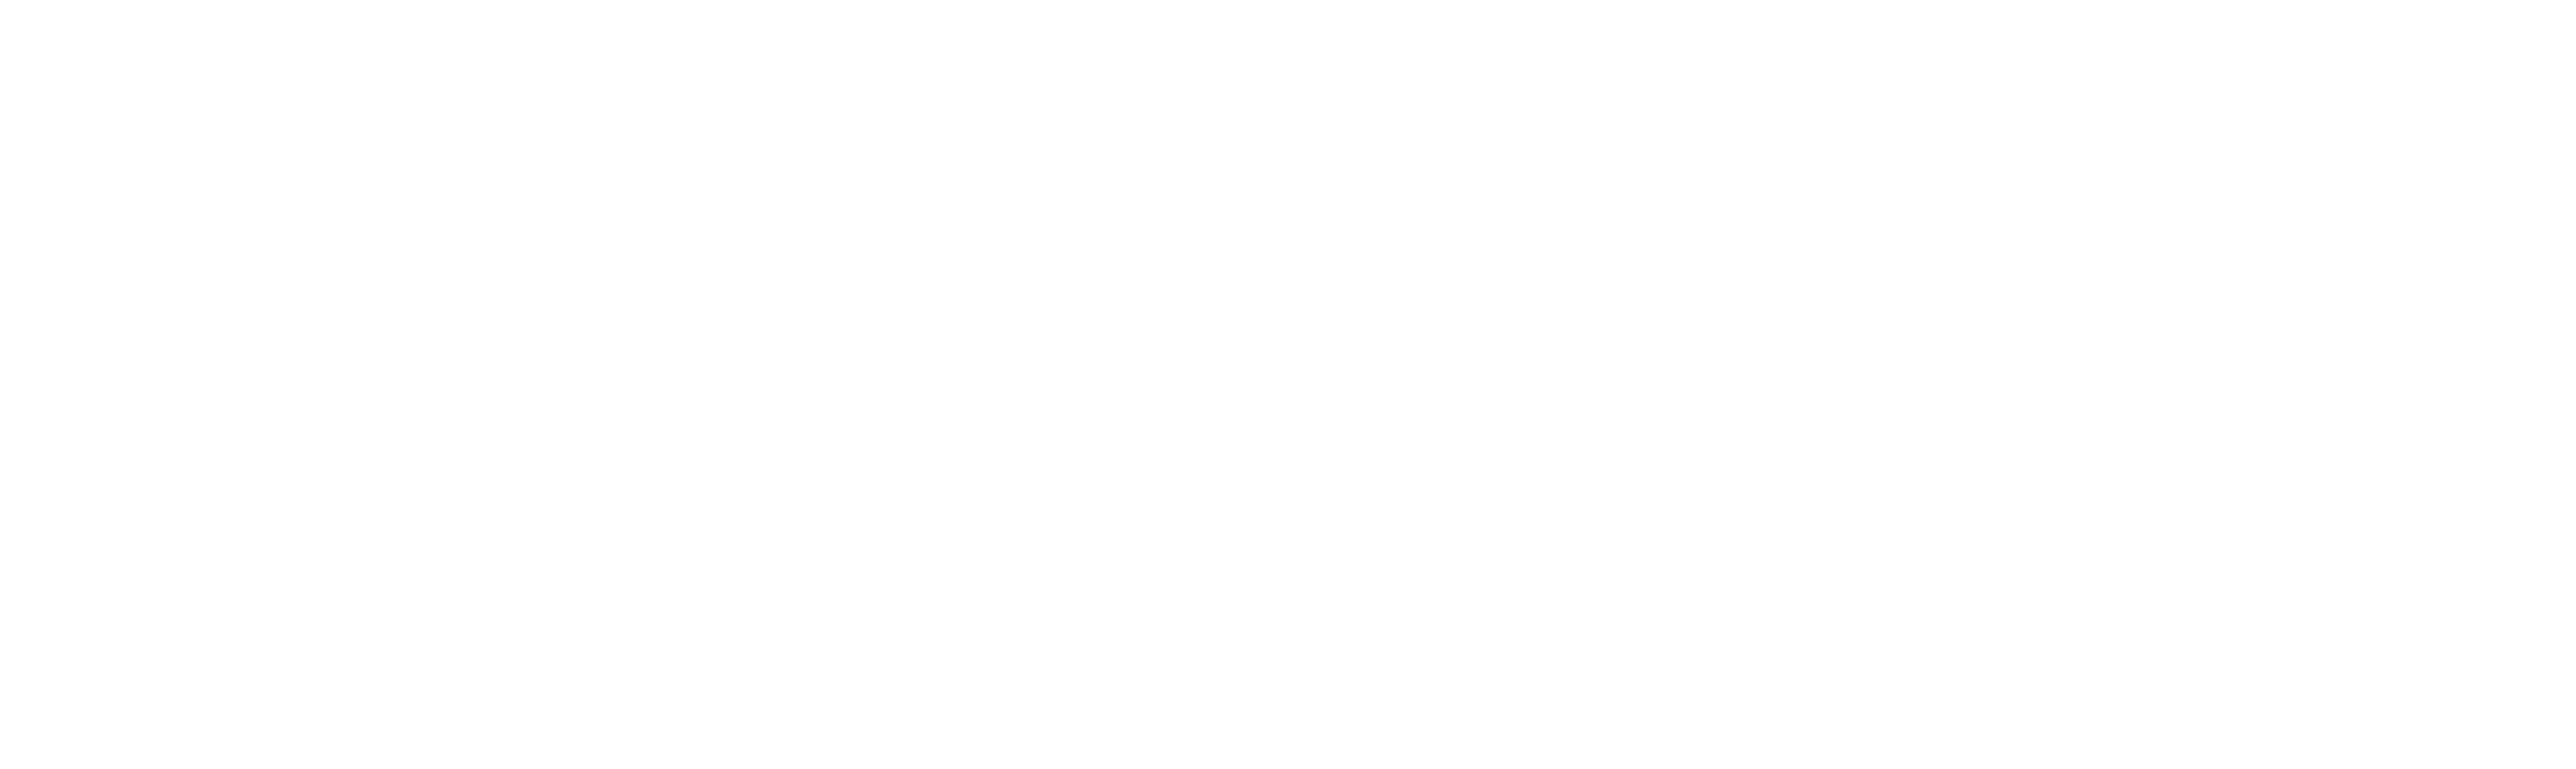 department of tourism culture arts gaeltacht sport and media